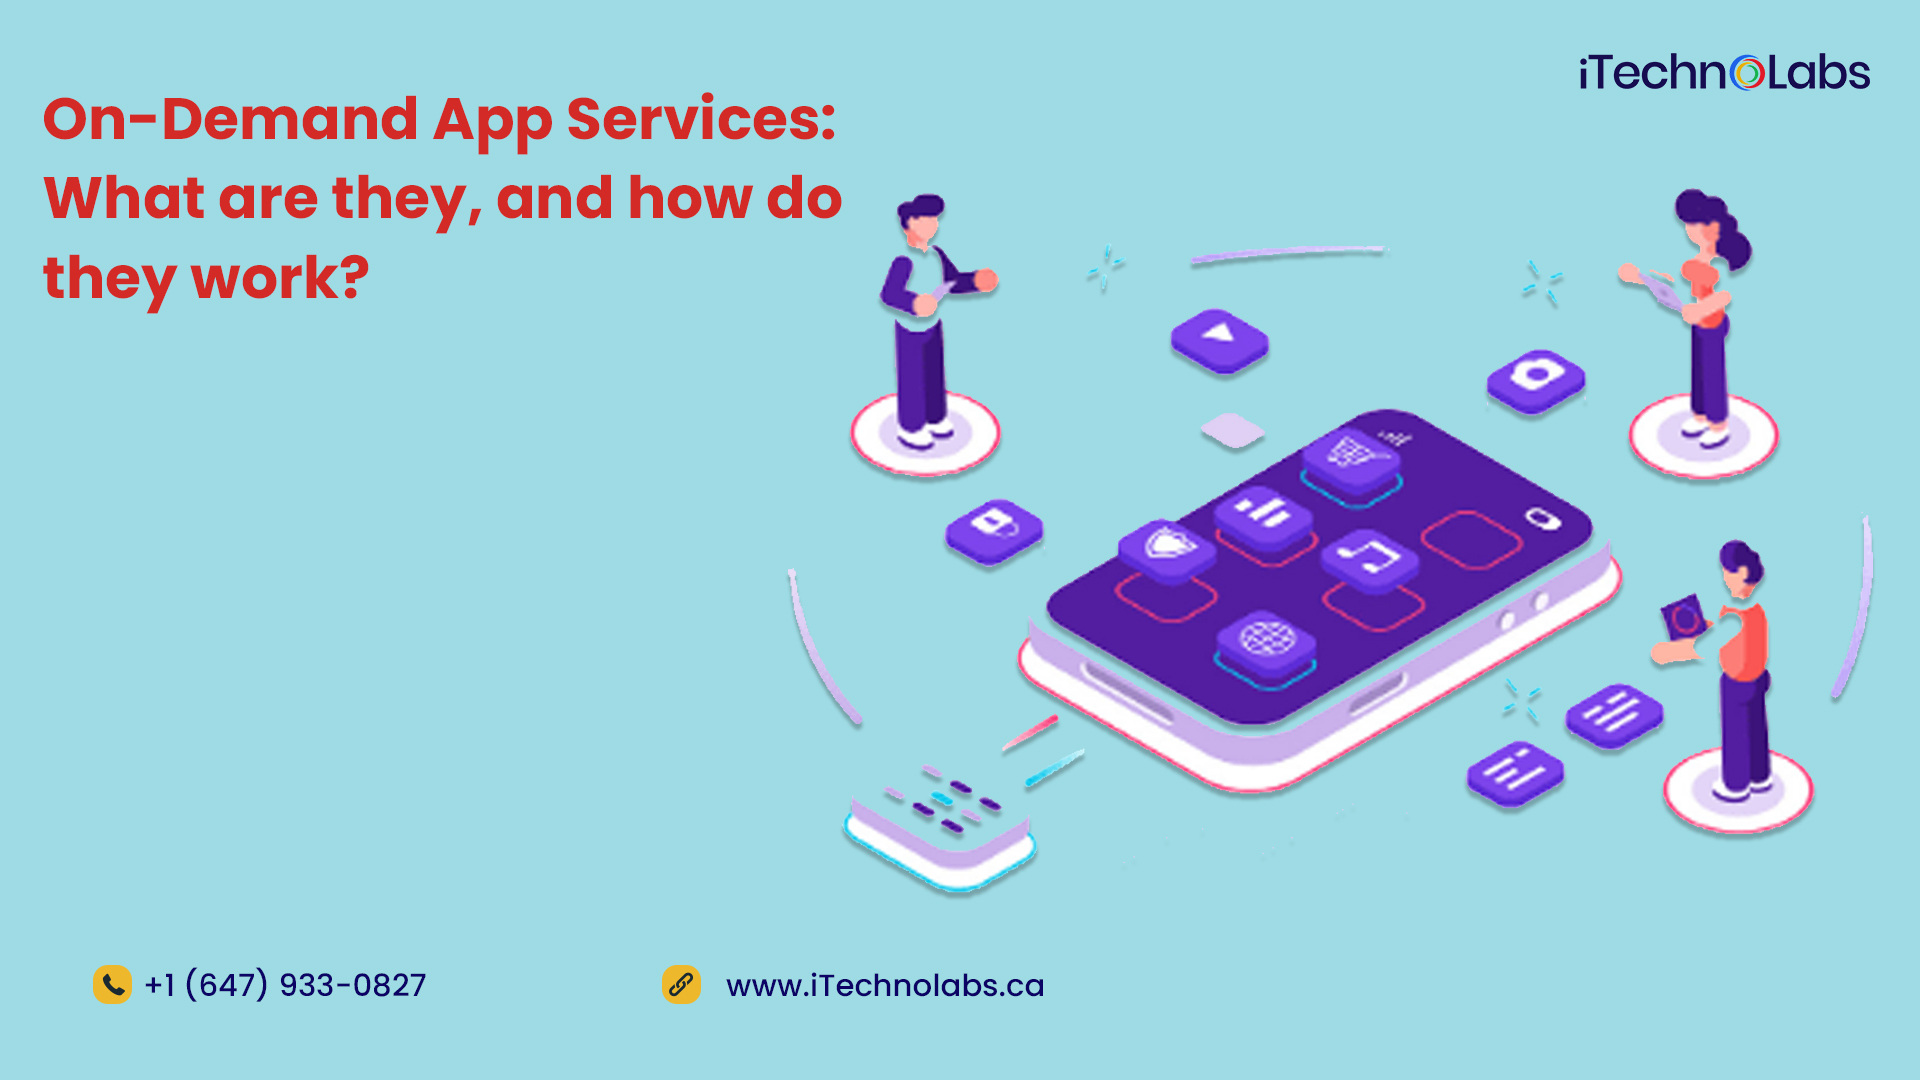 On-Demand-App-Services-What-are-they-and-how-do-they-work-itechnolabs